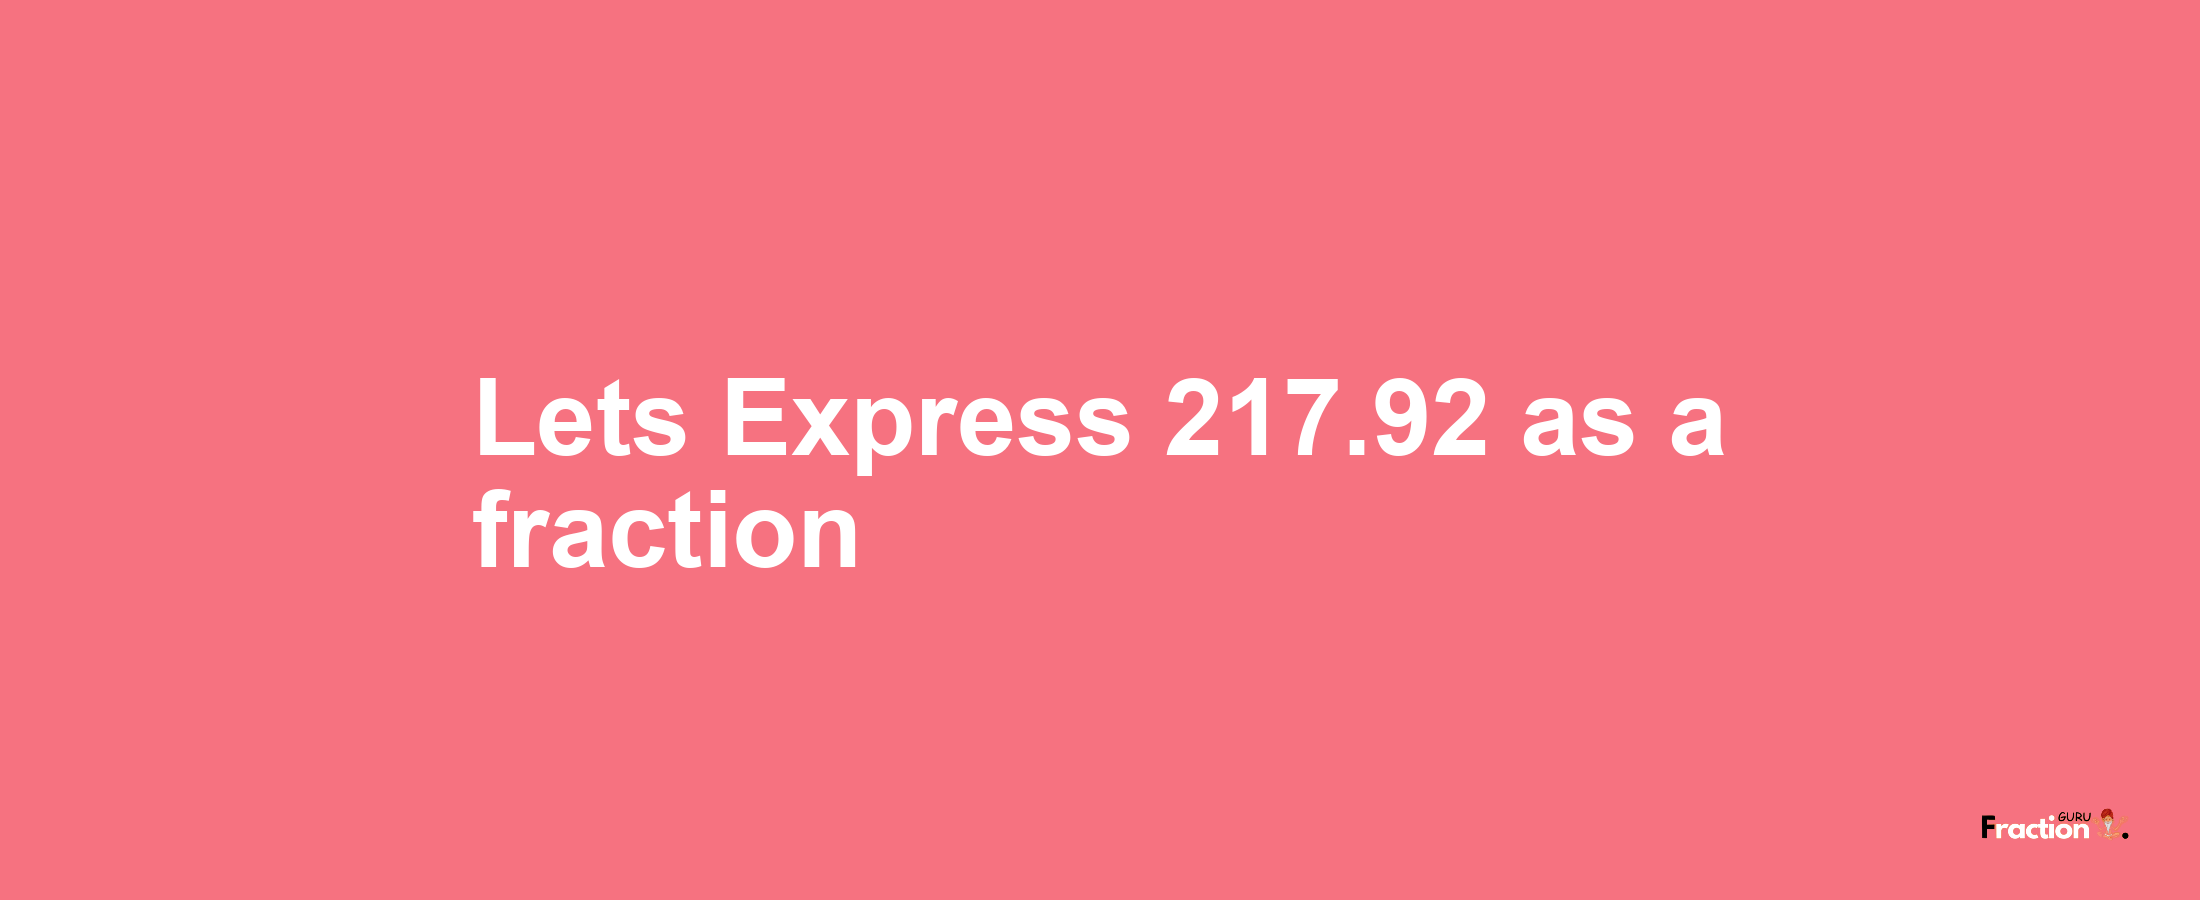 Lets Express 217.92 as afraction